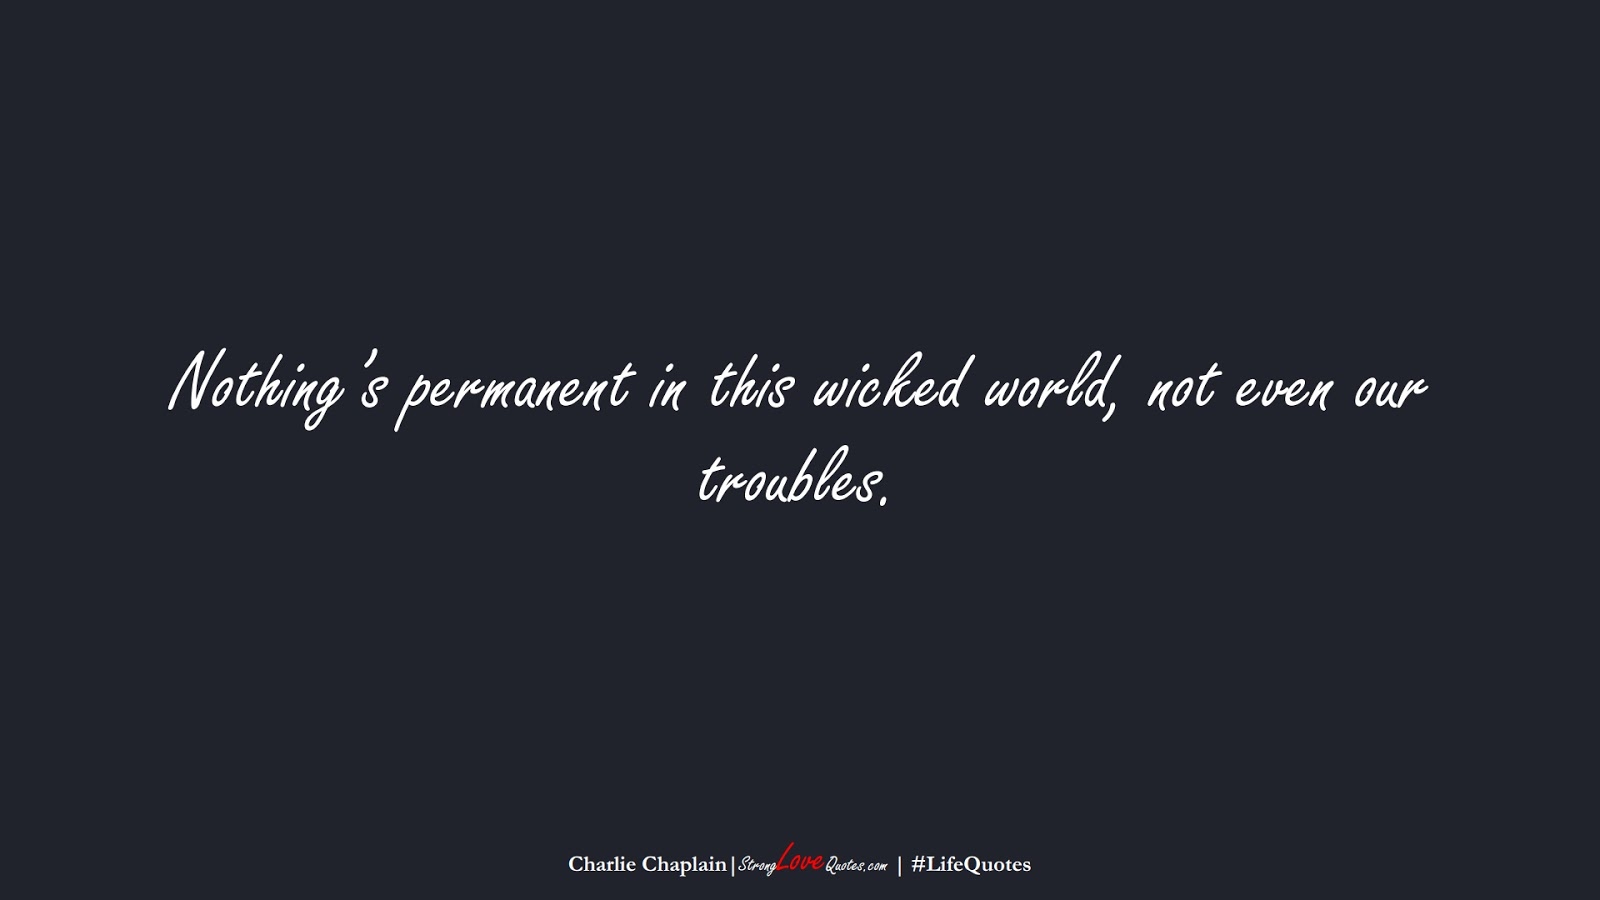 Nothing’s permanent in this wicked world, not even our troubles. (Charlie Chaplain);  #LifeQuotes